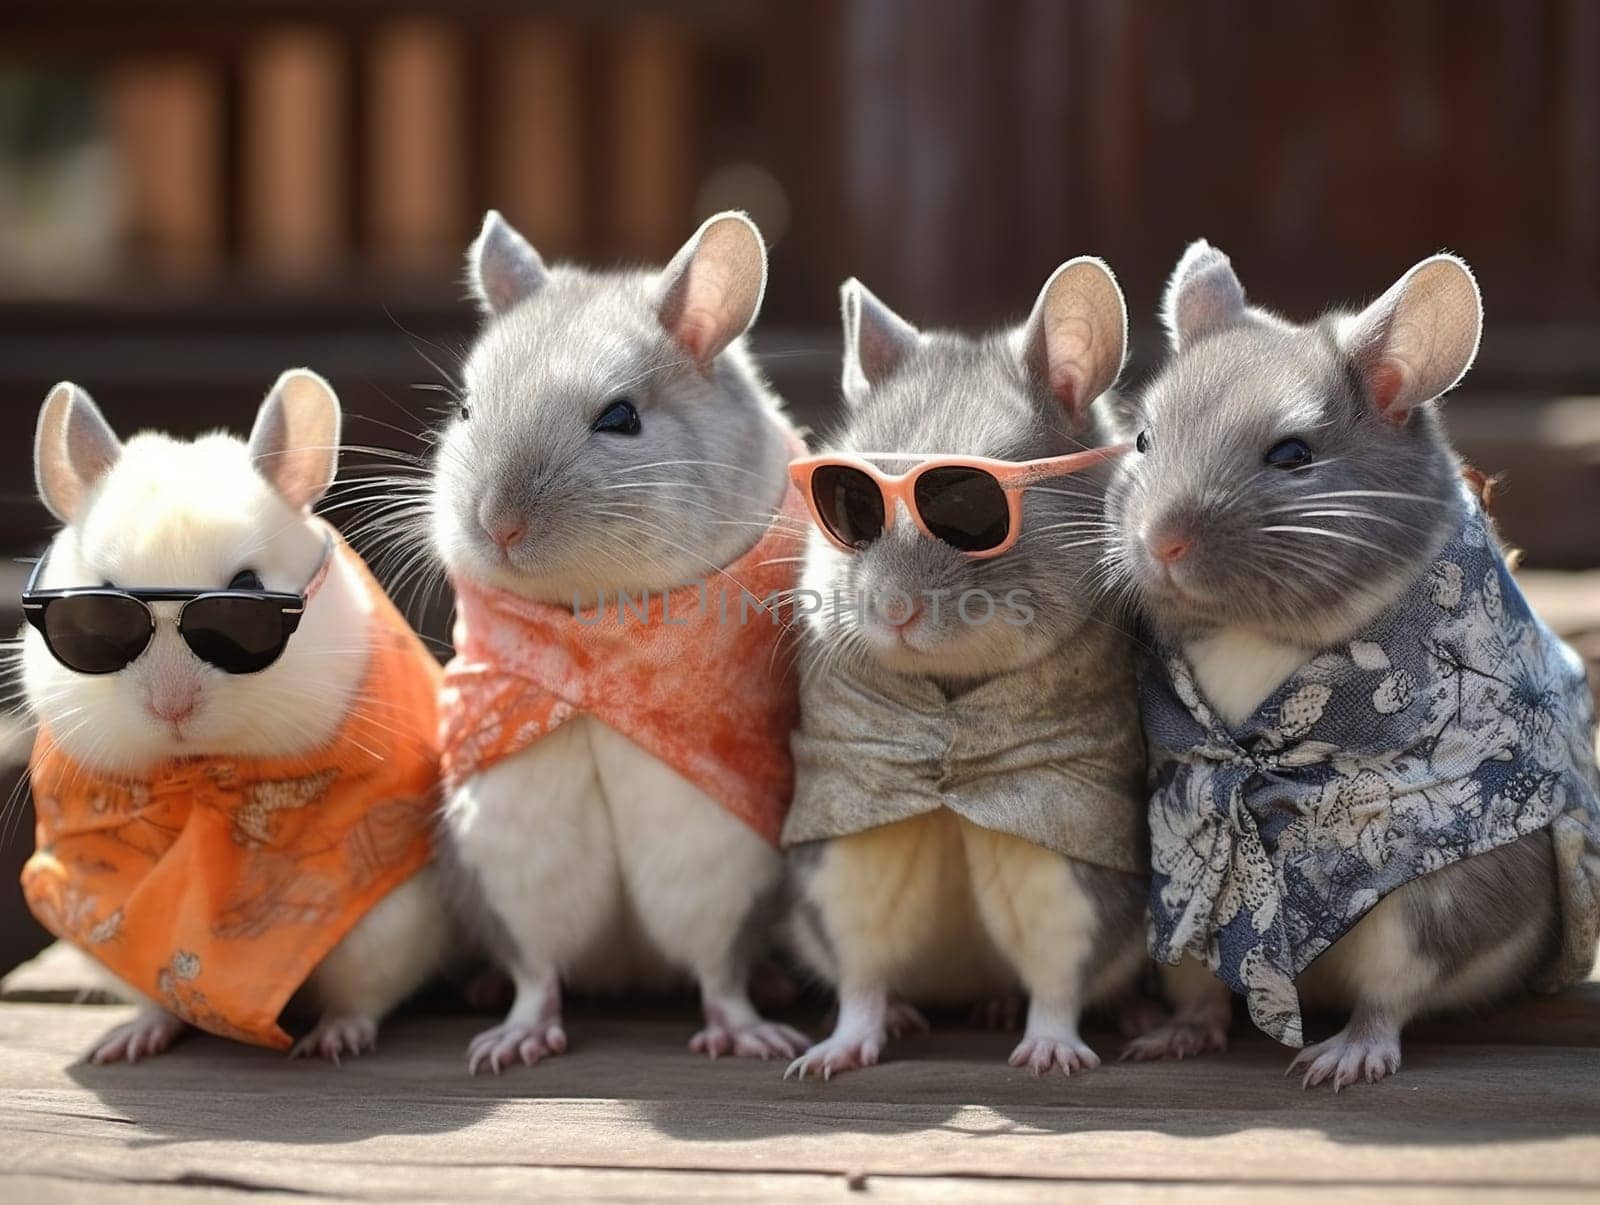 Funny Mice Wearing Shawls And Sunglasses, Sitting In Row by tan4ikk1